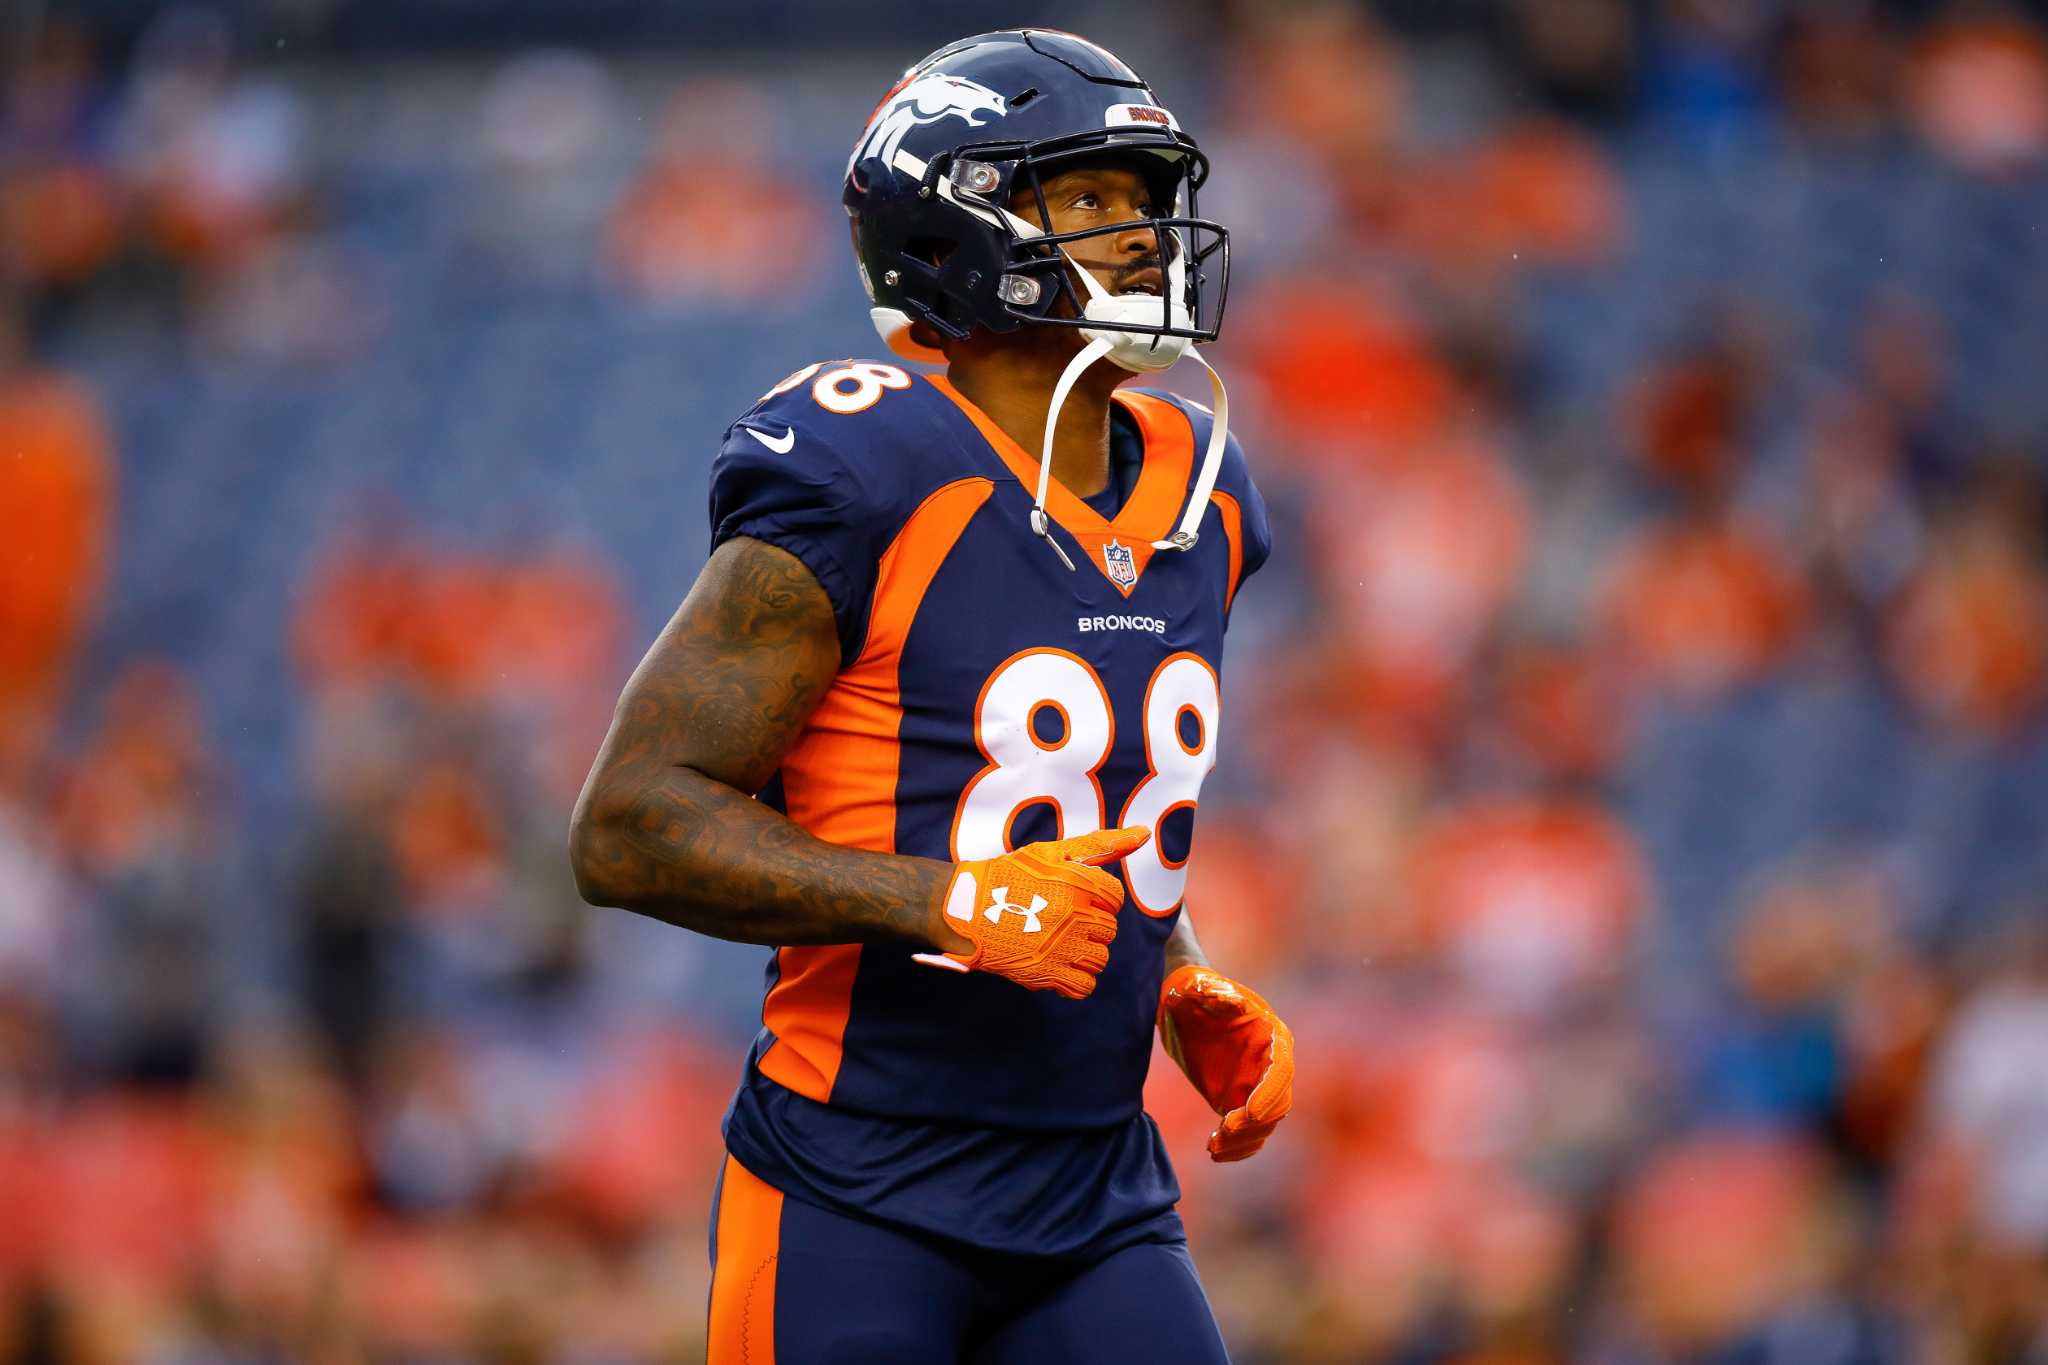 New Texans WR Demaryius Thomas after trade: 'I'm excited, I'm ready to get  to work'